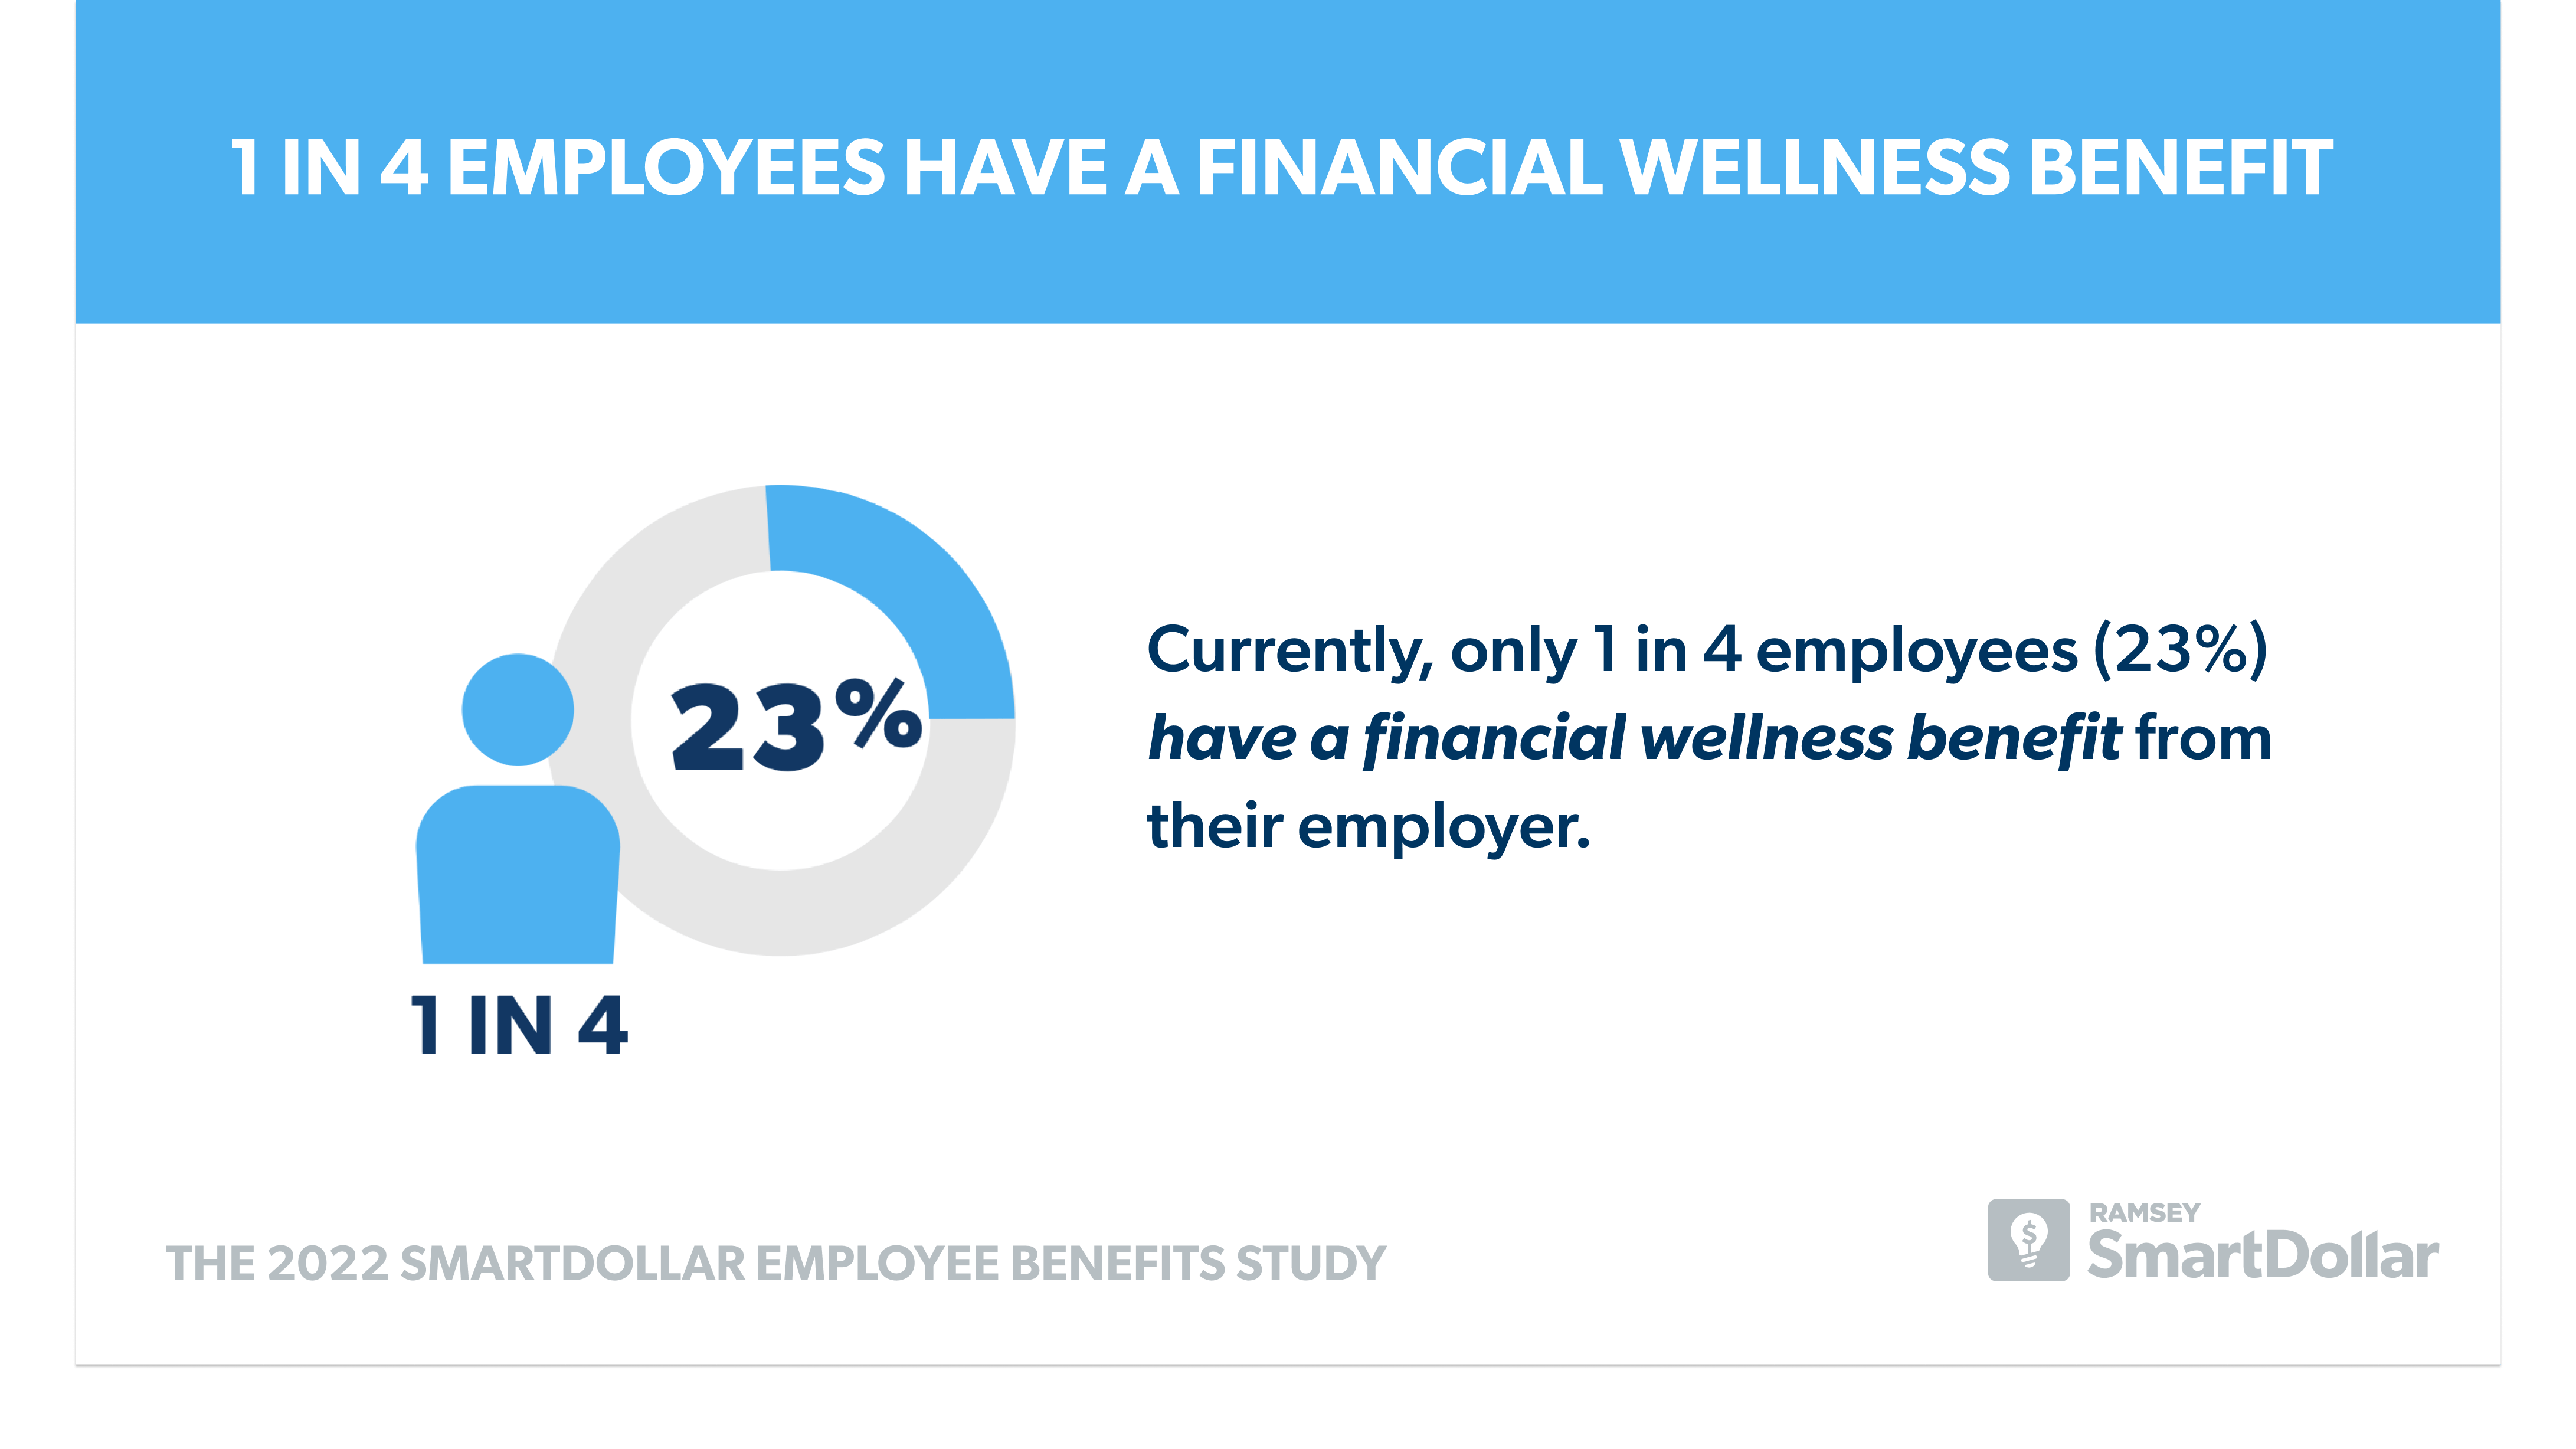 1 in 4 employees have a financial wellness benefit